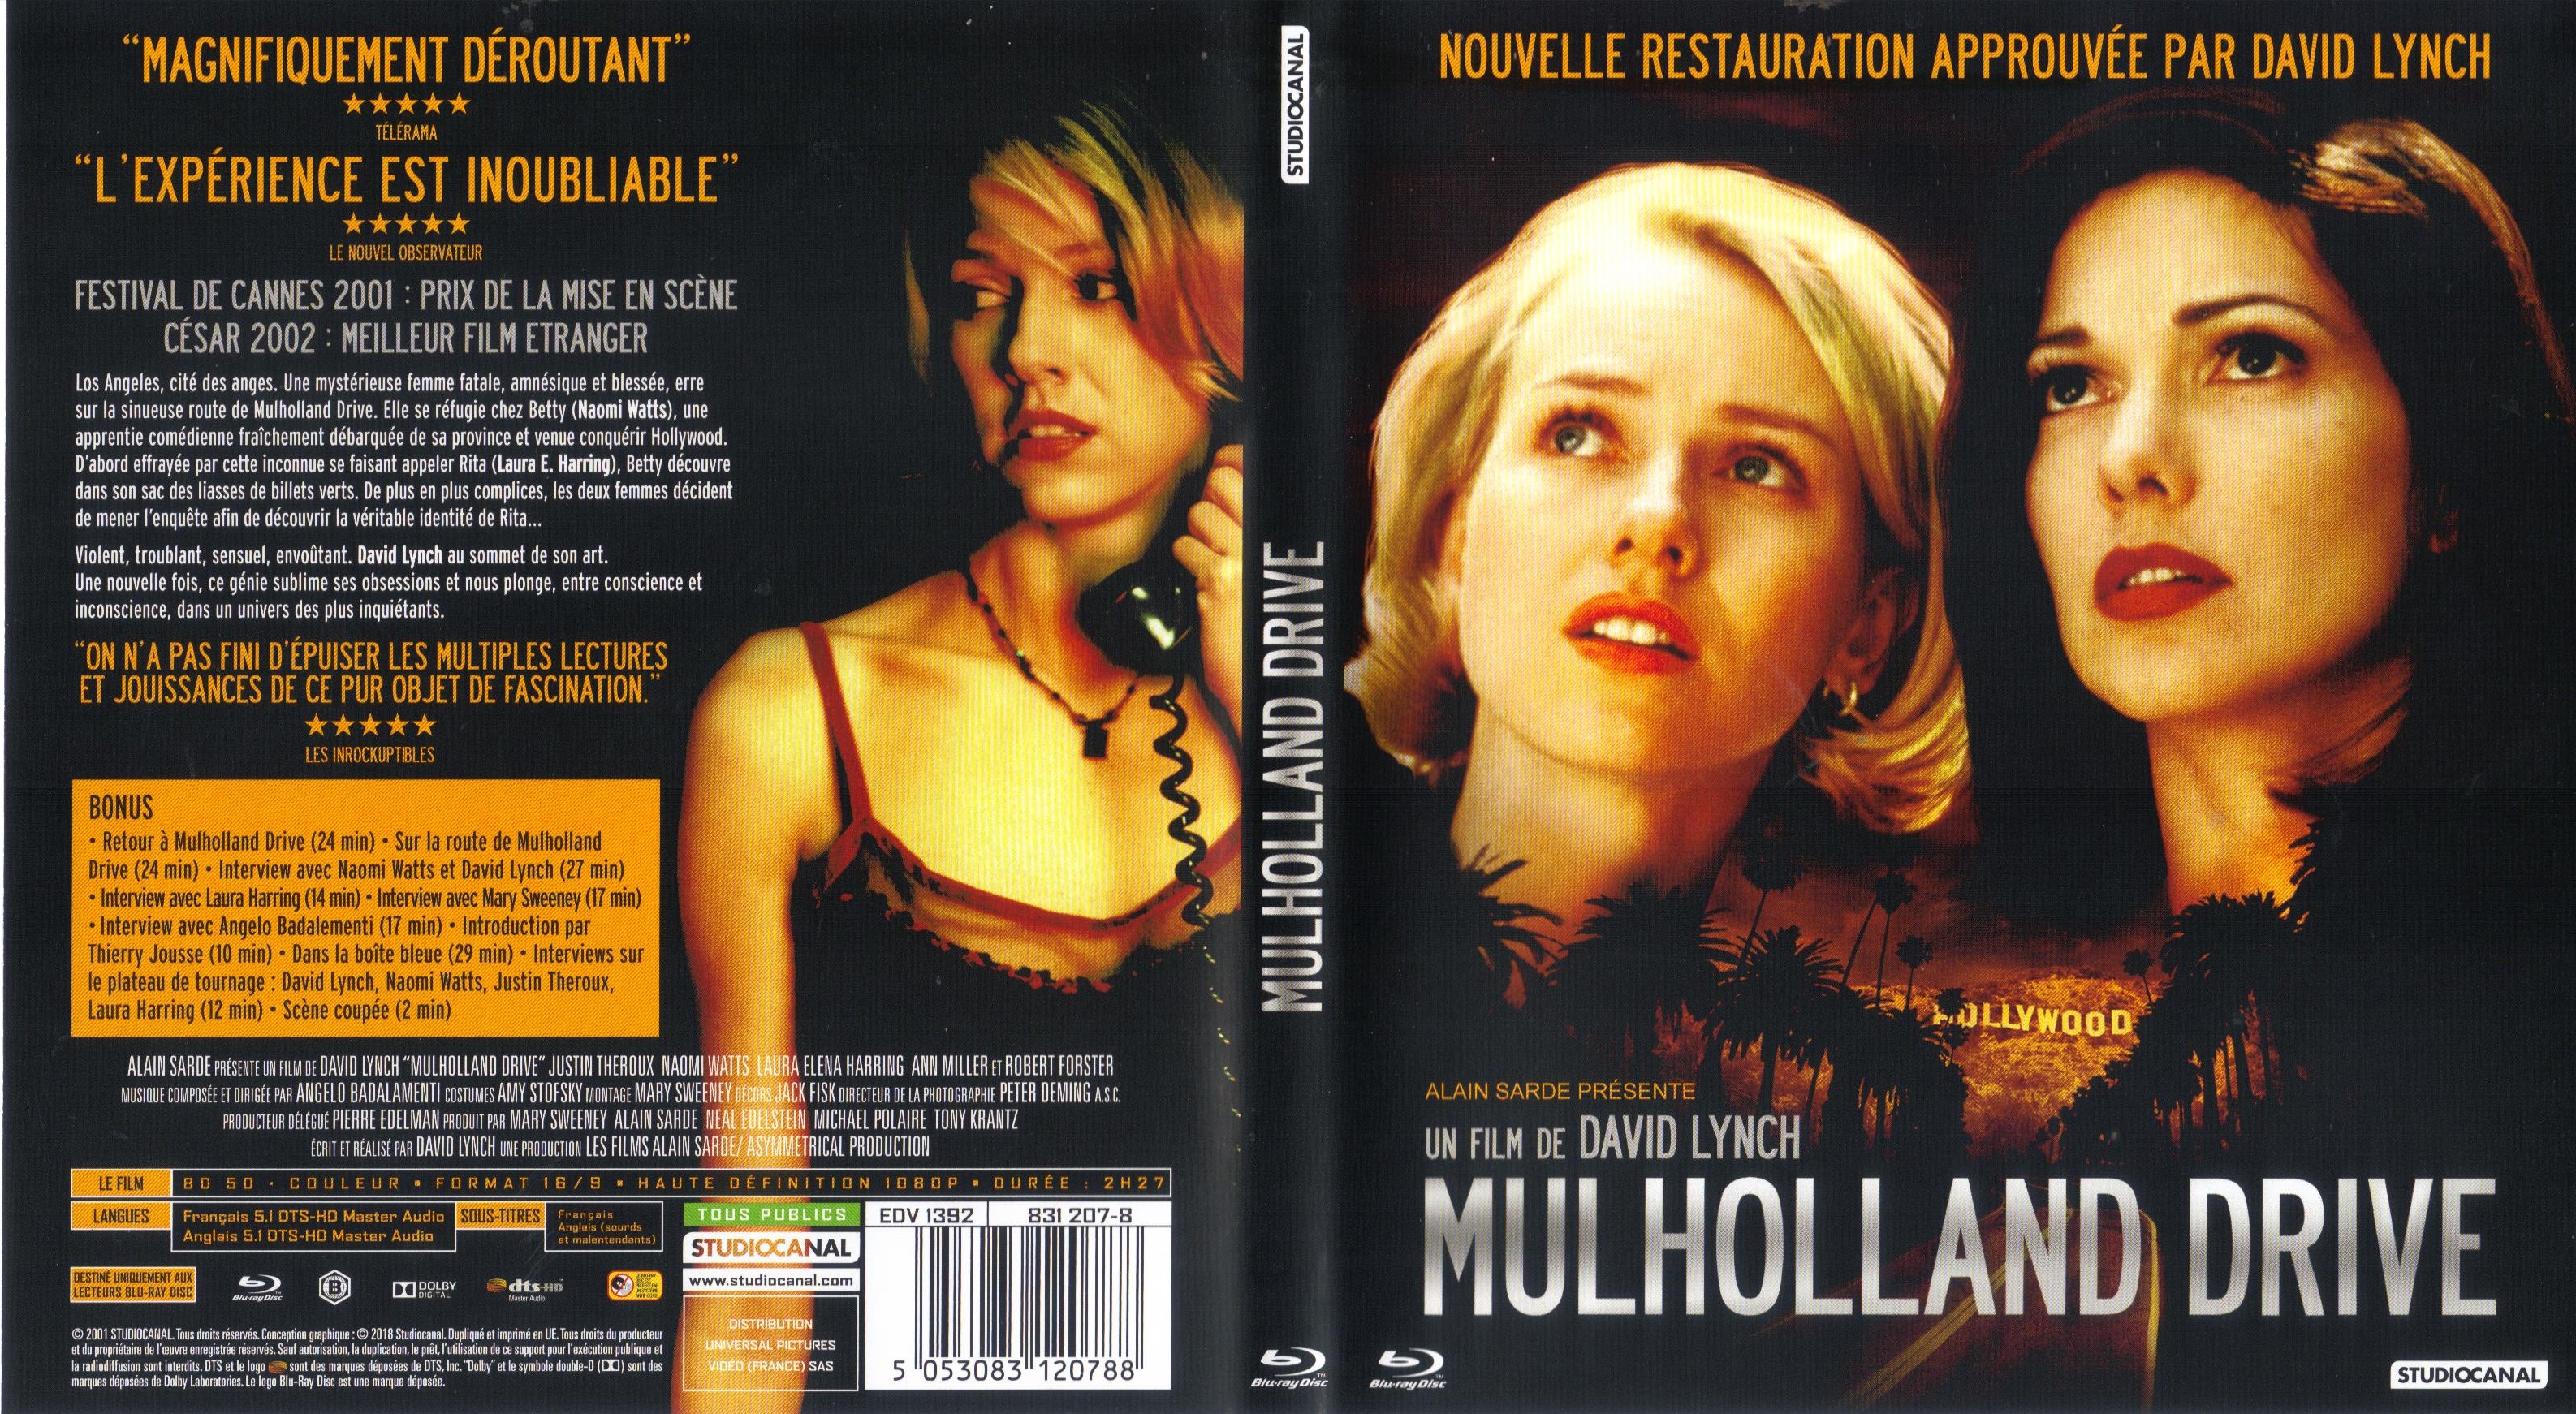 Jaquette DVD Mulholland drive (BLU-RAY) v2